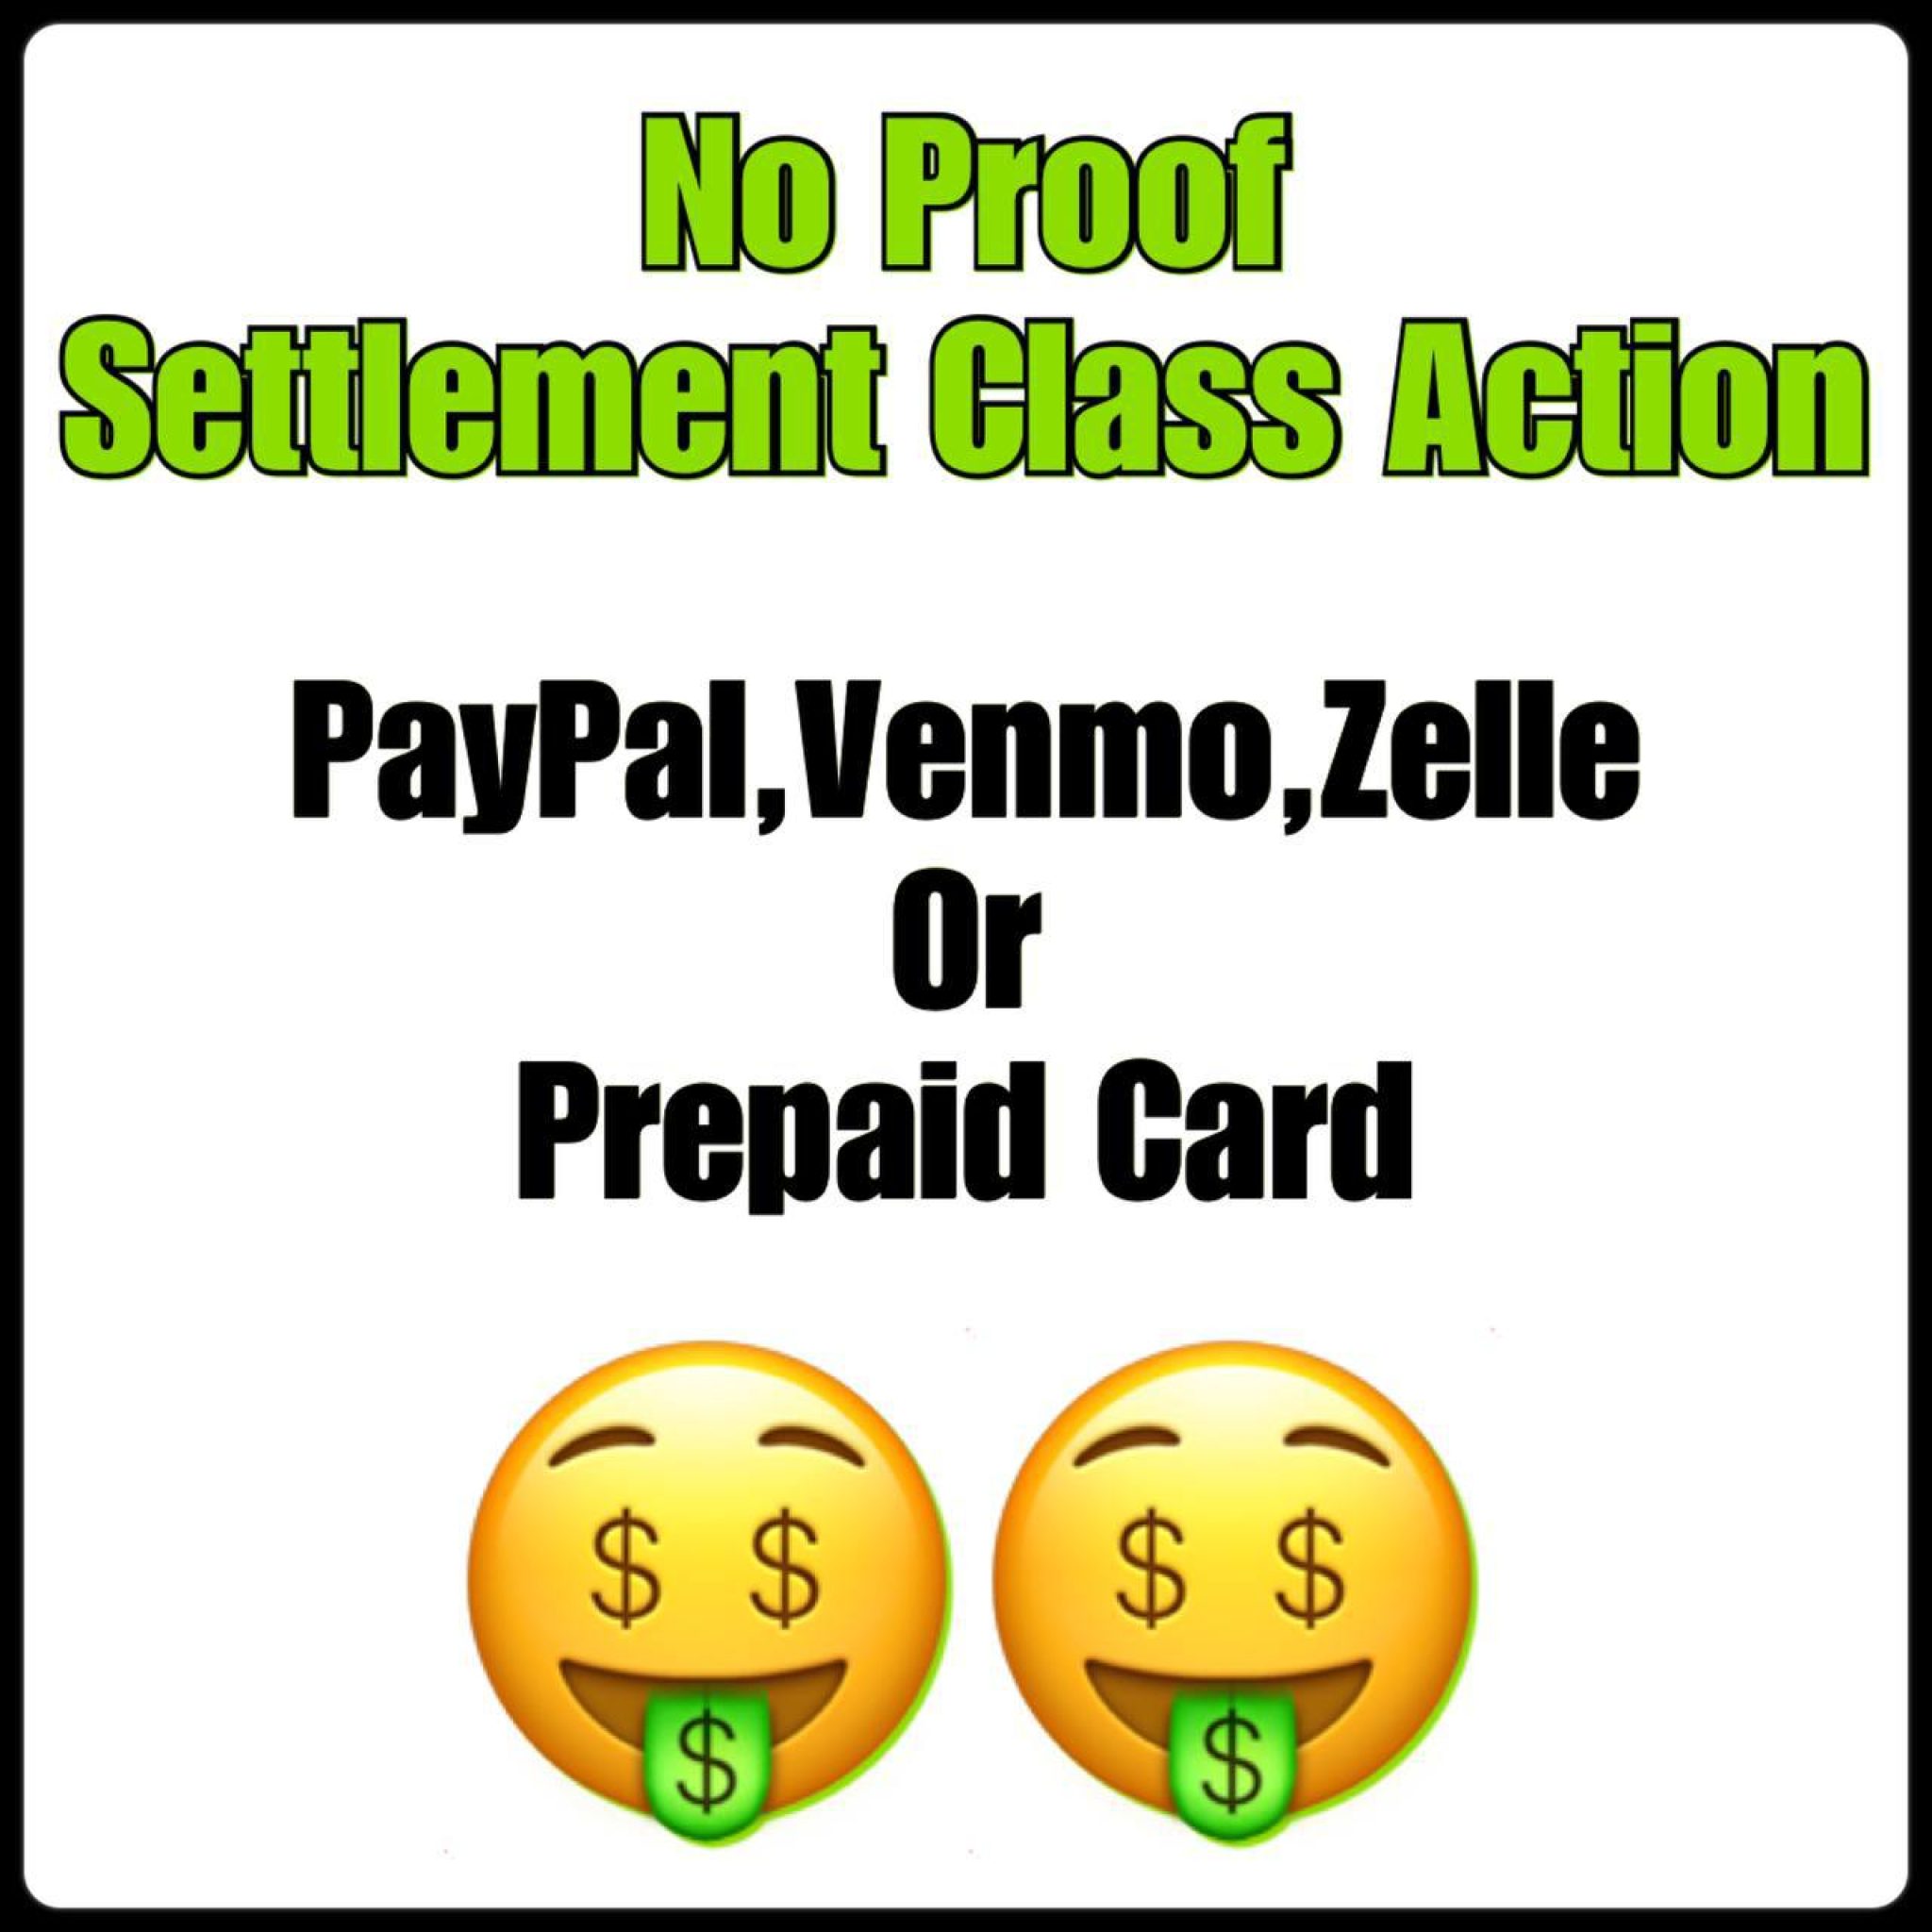 FREE MONEY NO PROOF CLASS ACTION! Yes We Coupon